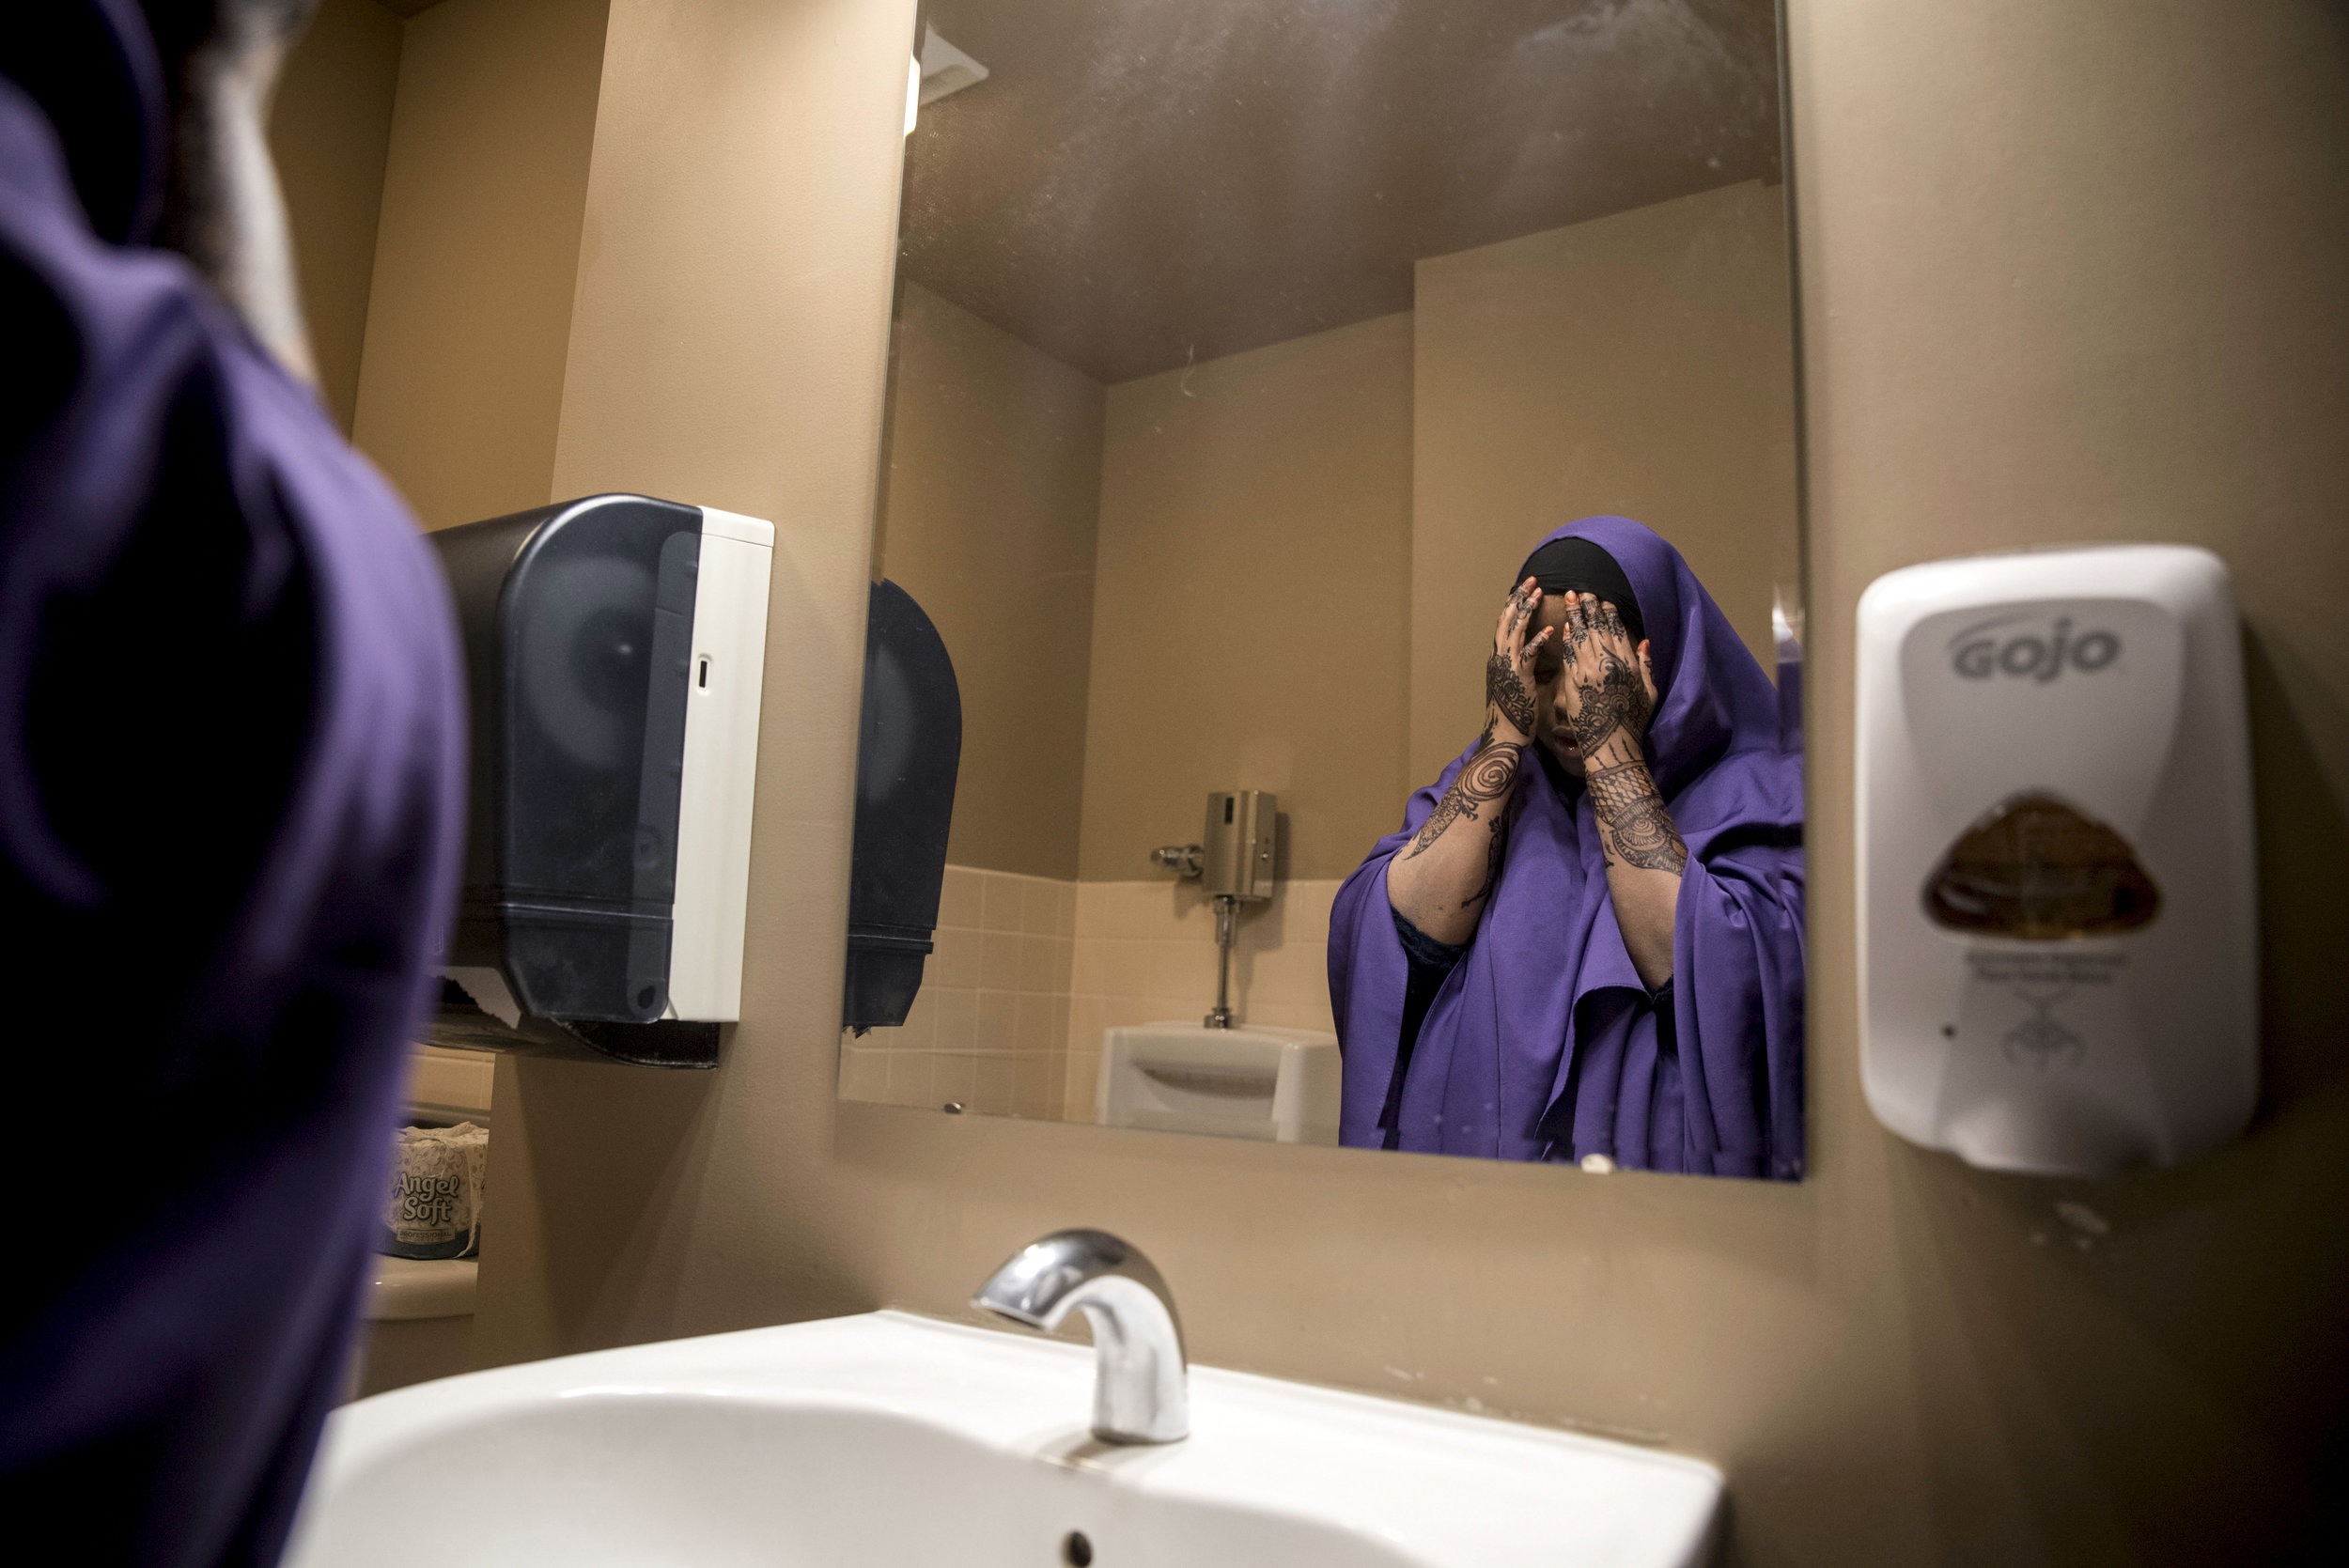  Kosar washes her face in the bathroom before praying during her lunch break at United Community Action Partnership Feb. 13, 2018 in Willmar. After graduating high school, she worked several jobs and now works as a Somali Bilingual Outreach Worker at